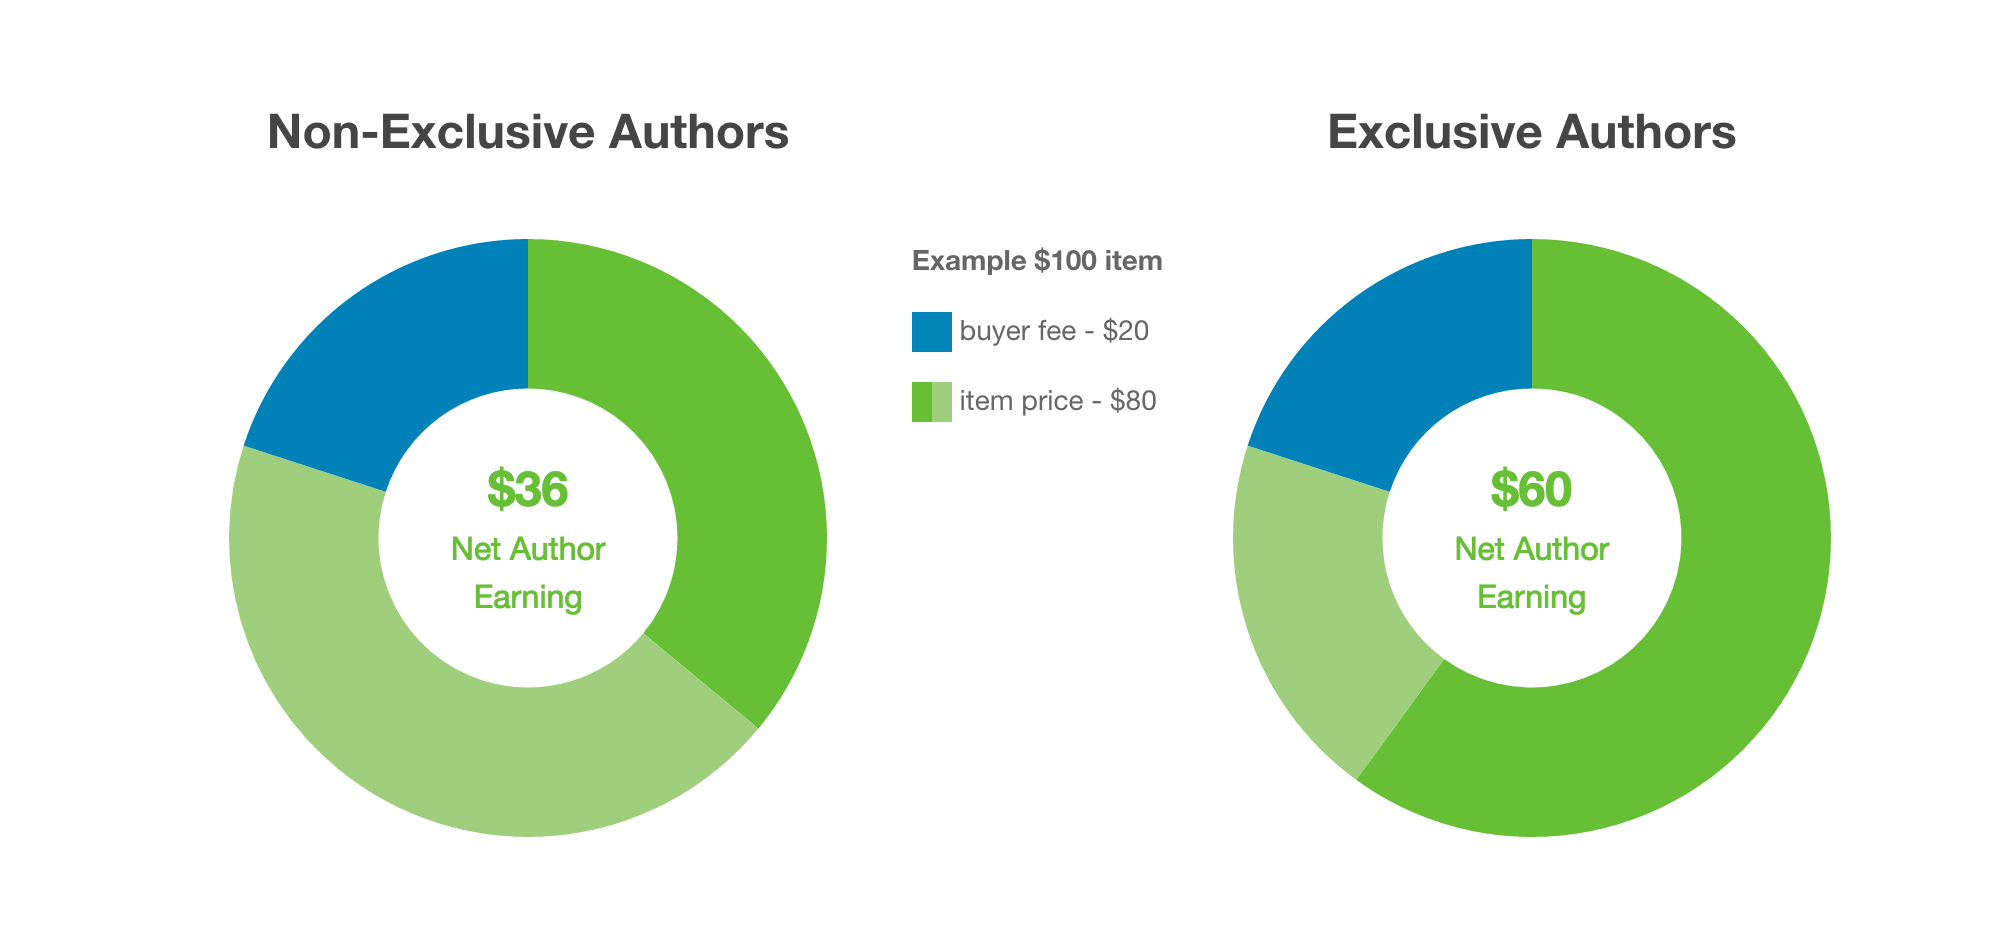 Envato’s payout from a $100 sale is $60 for exclusive and $36 for non-exclusive authors